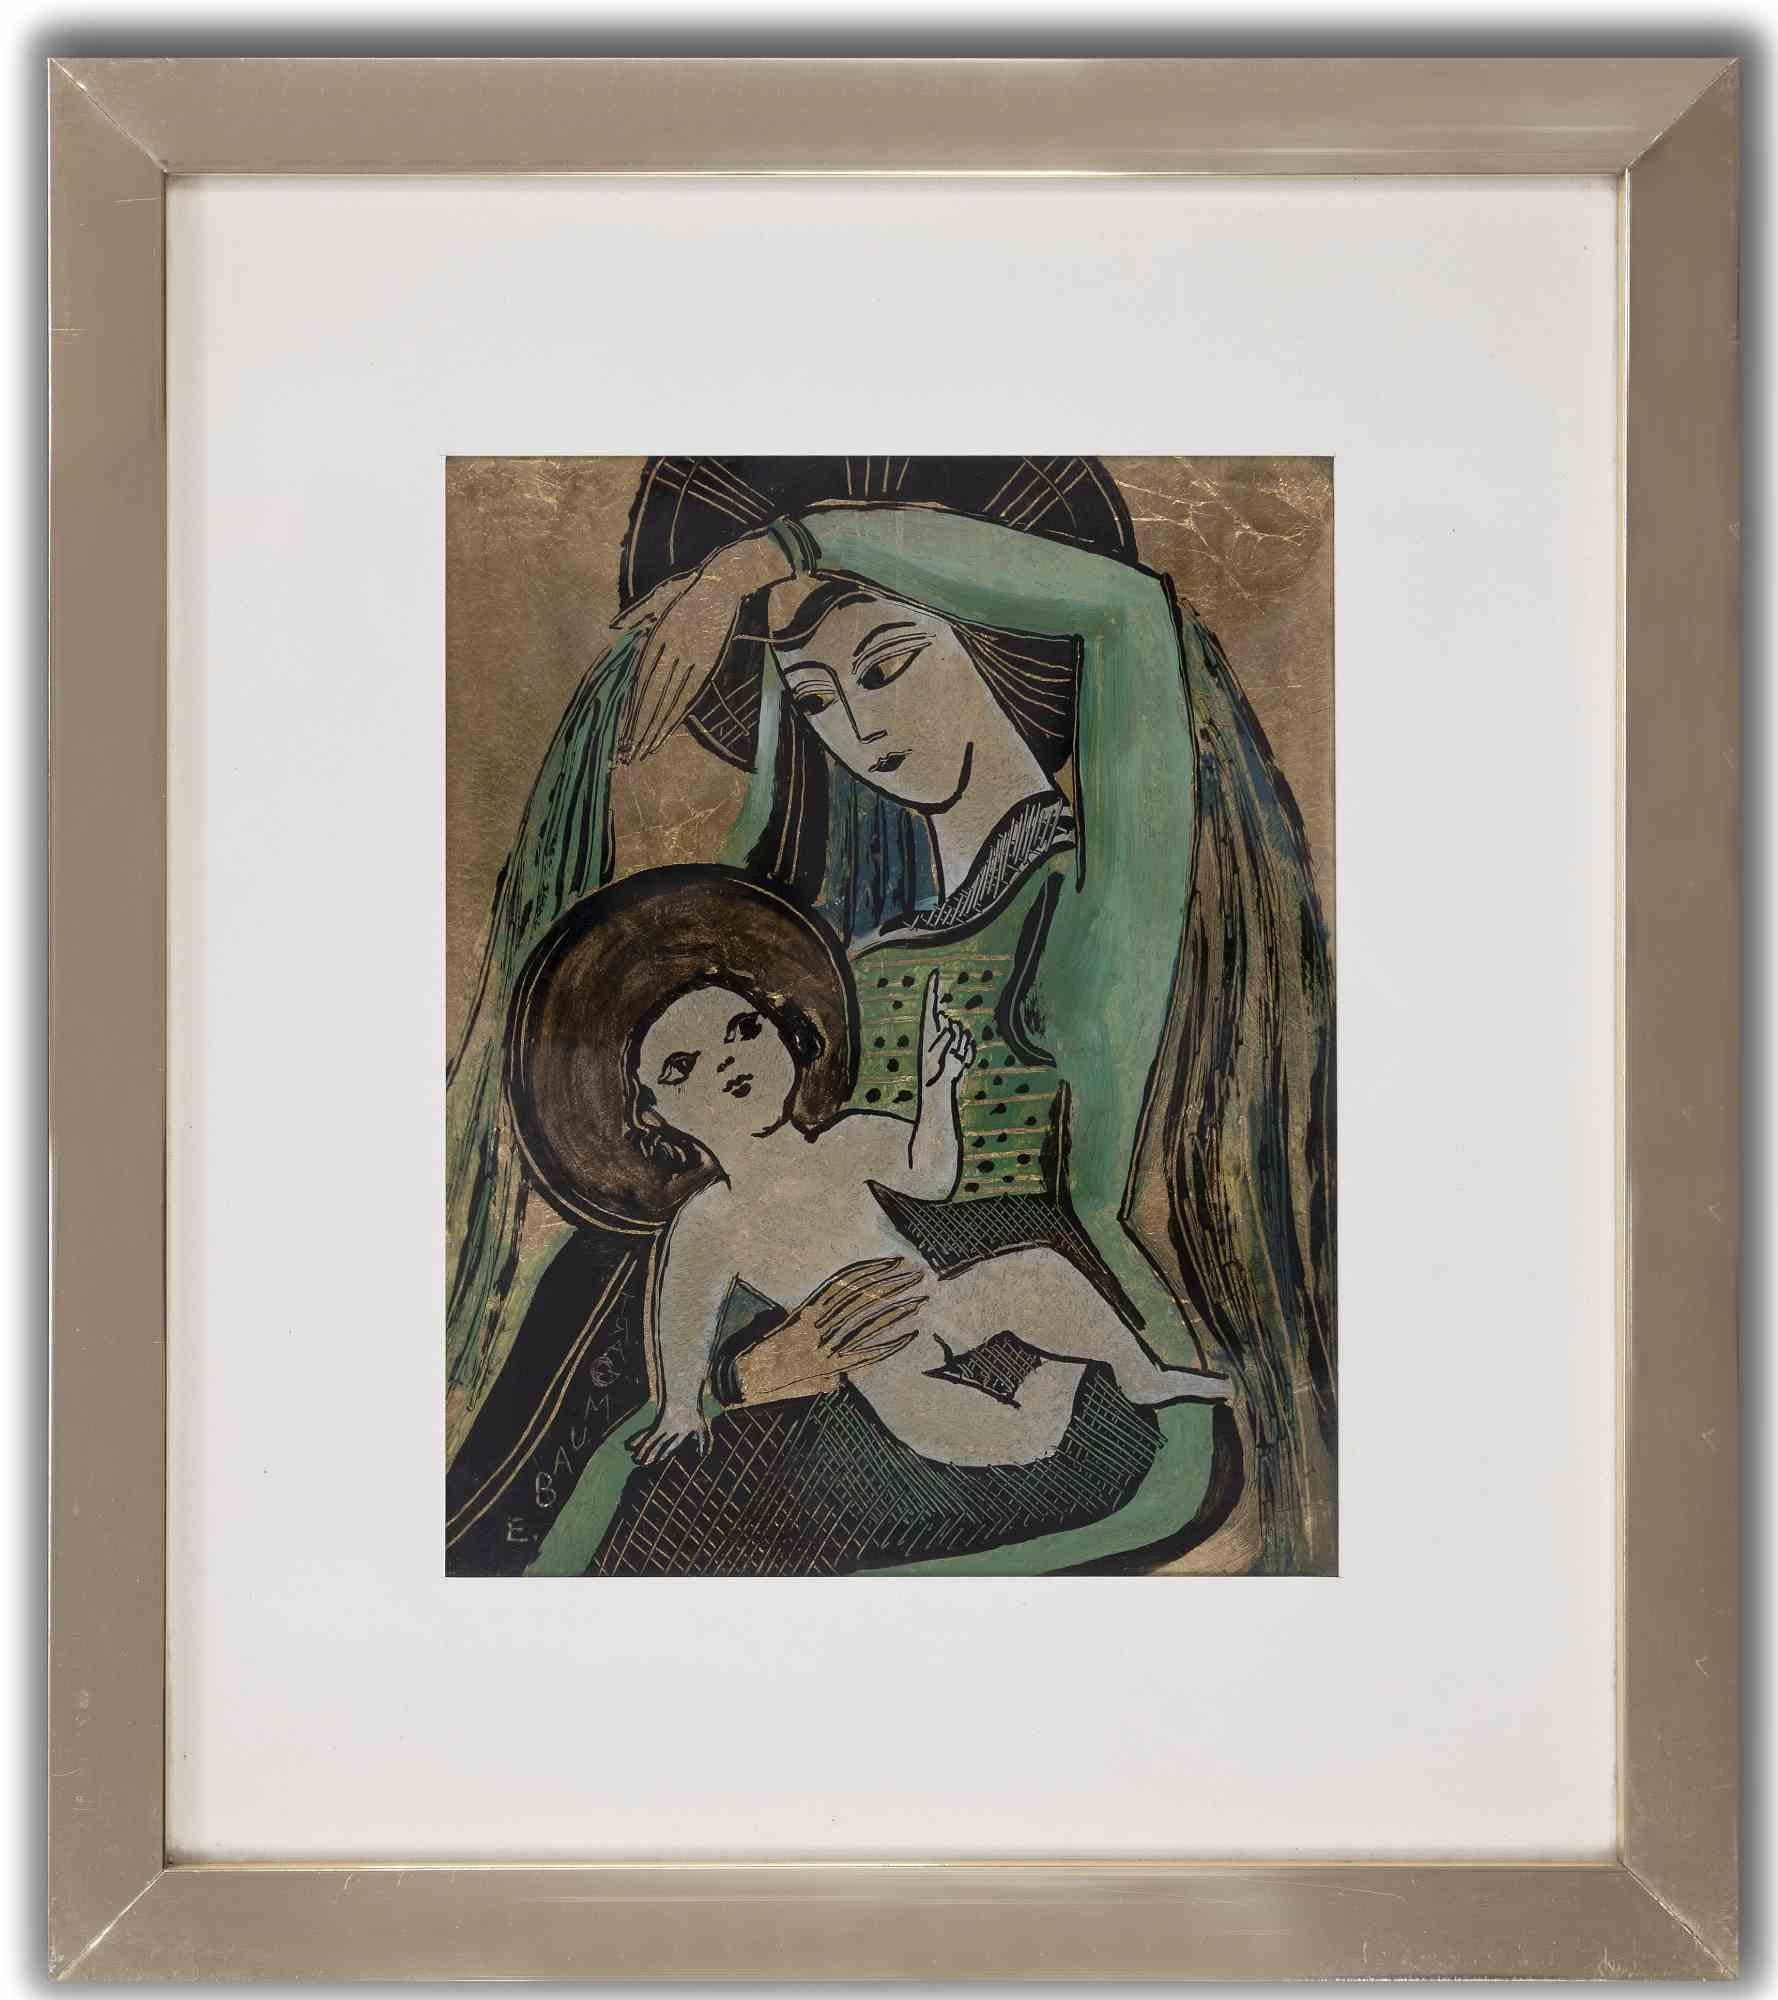 Holy Scene is a modern artwork realized by E. Baumgart.

Mixed media (ink, tempera and watercolor) on cardboard.

Hand signed on the left margin.

Includes frame: 33 x 29 cm